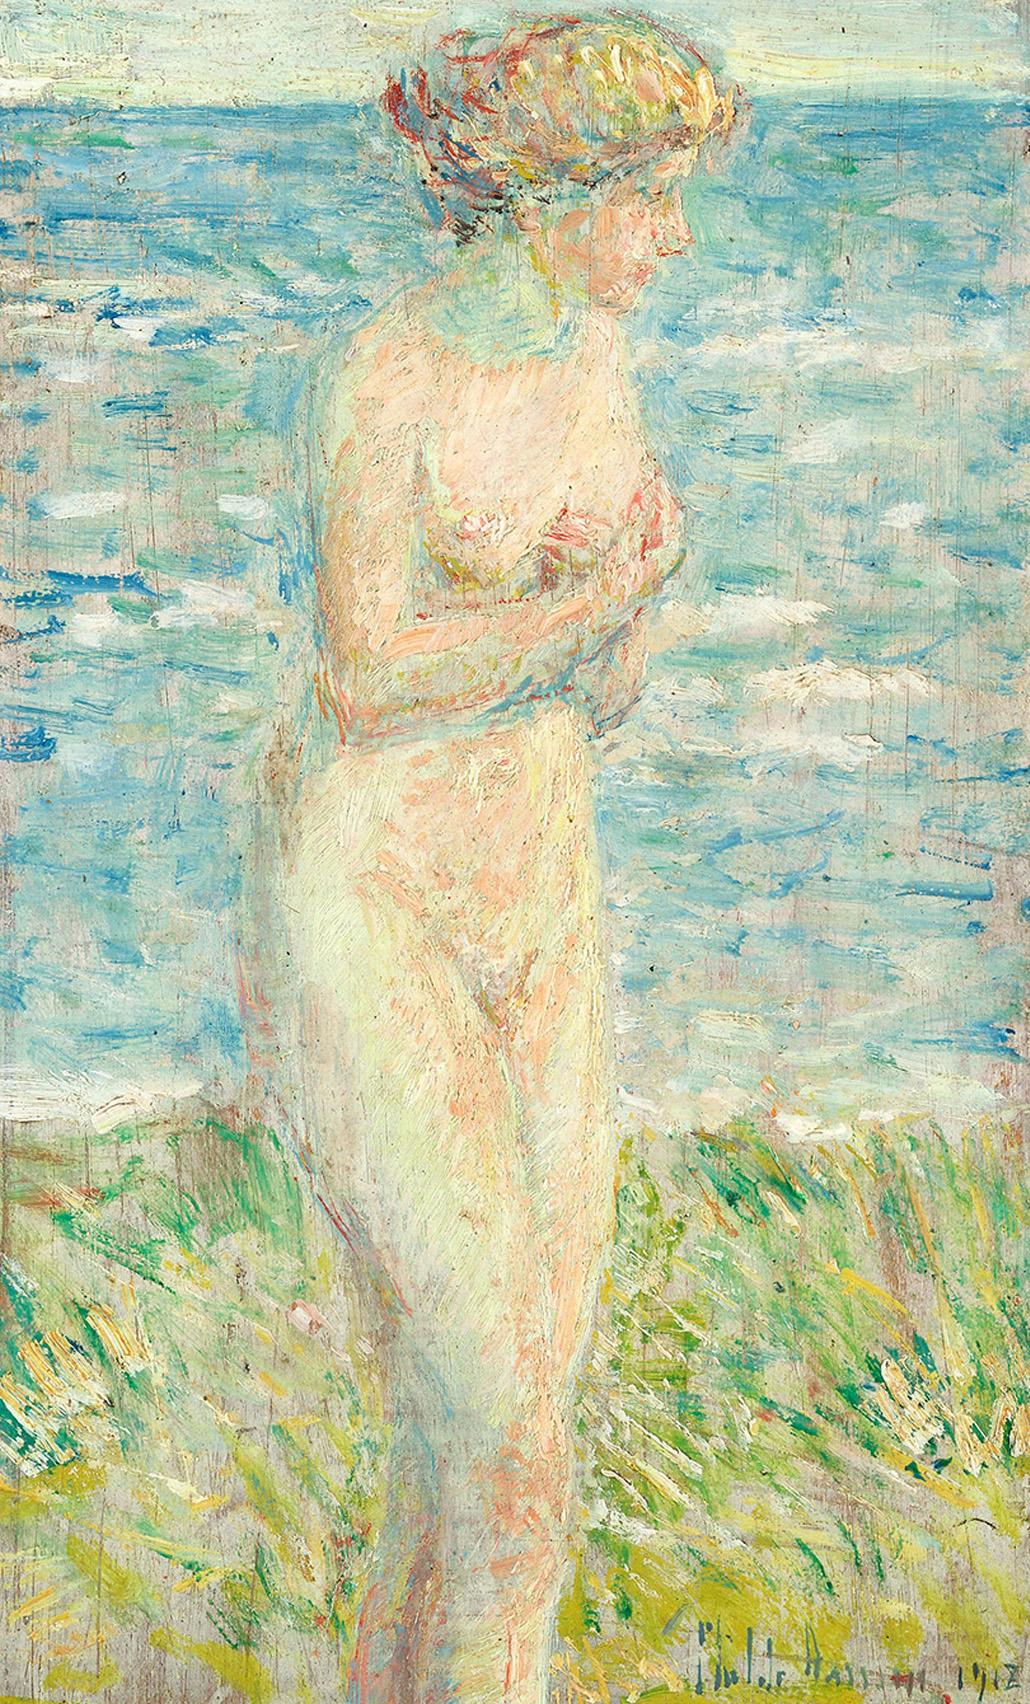 CHILDE HASSAM (1859-1935)
A Bather, Silver Beach Grass, 1918
Oil on panel
9 5/16 x 5 9/16 inches
Signed and dated lower right: Childe Hassam / 1918

PROVENANCE
E. & A. Milch, New York, New York
Mrs. C. F. (Emily Lynch) Samson,